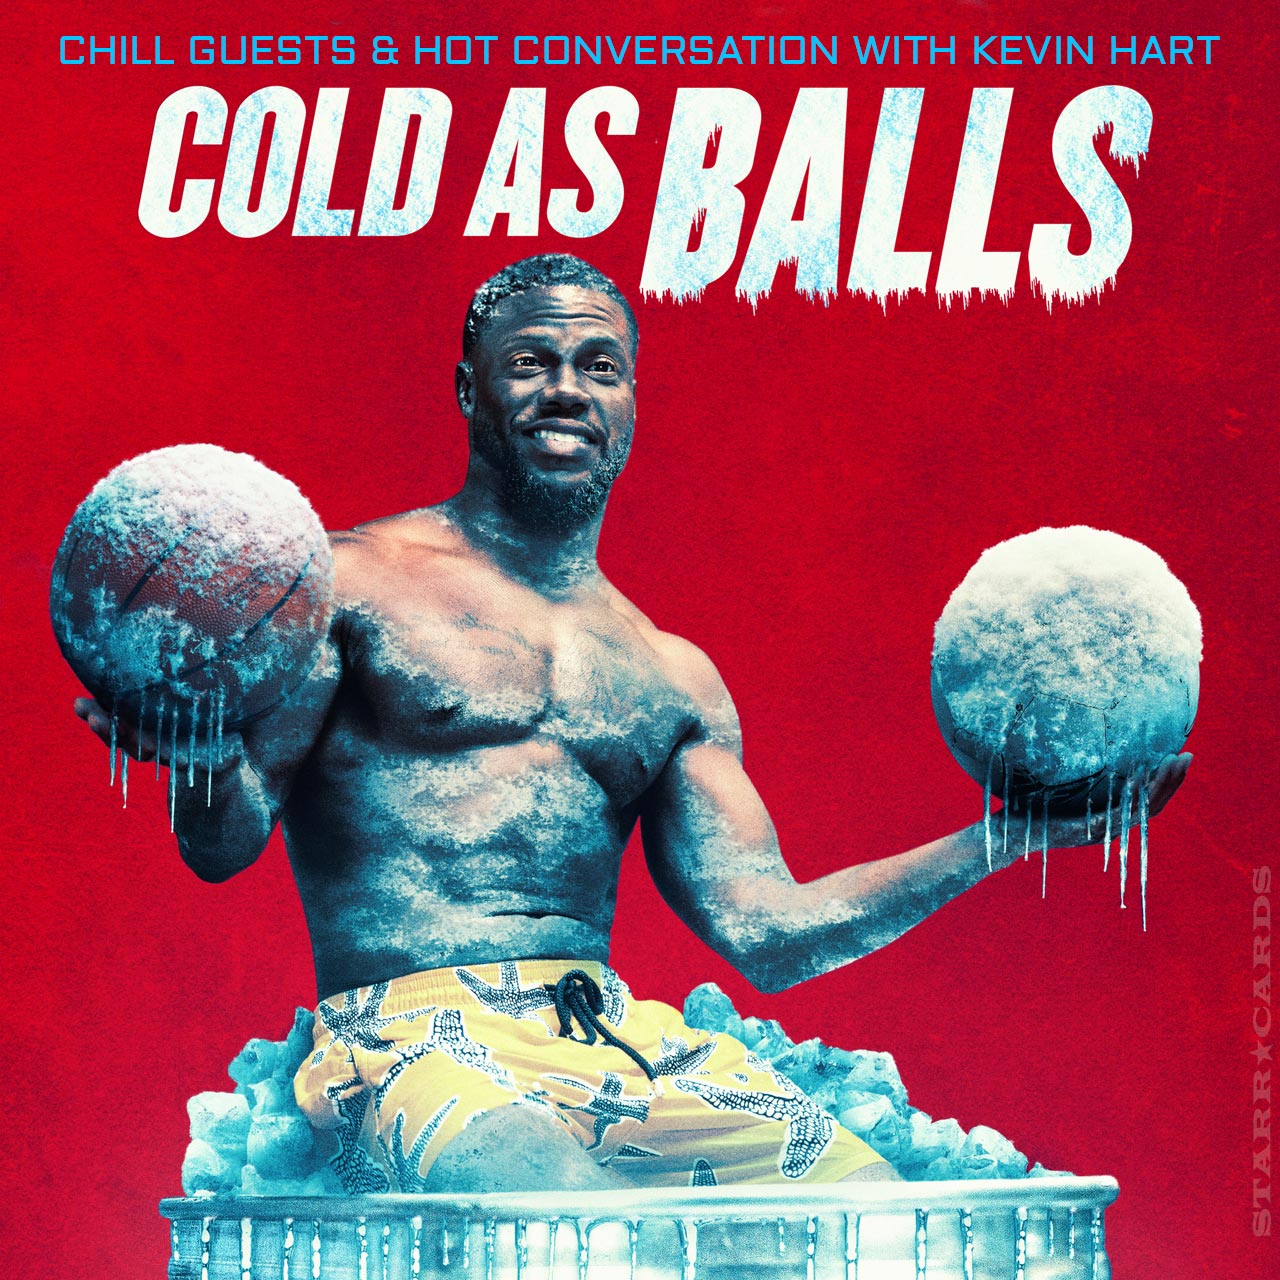 Cold as Balls: Chill Guests and Hot Conversation with Kevin Hart